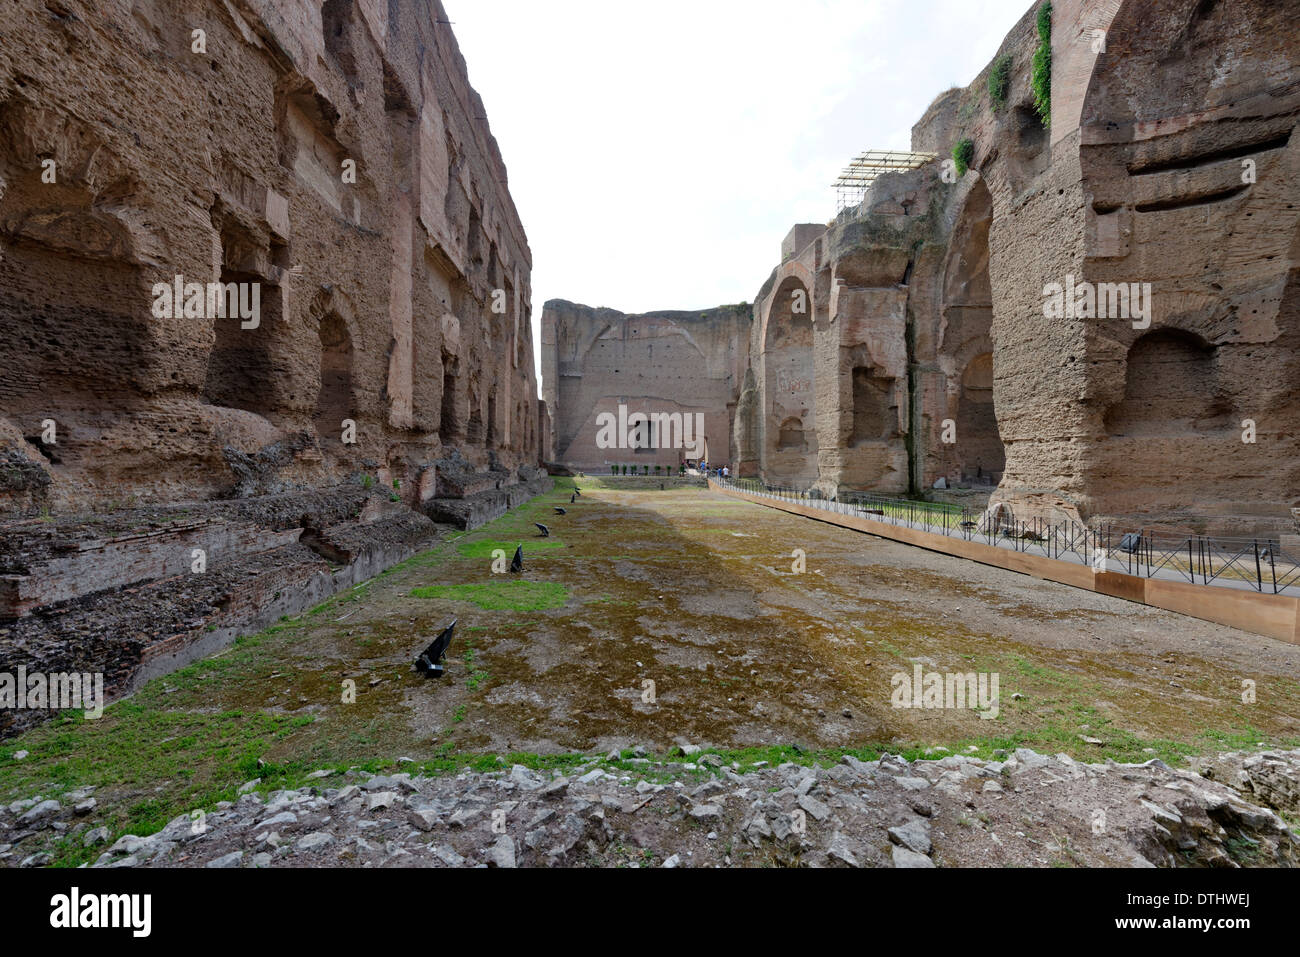 The open-air one metre deep Olympic sized Natatorium or swimming pool at north end Baths Caracalla Rome Italy Baths Stock Photo